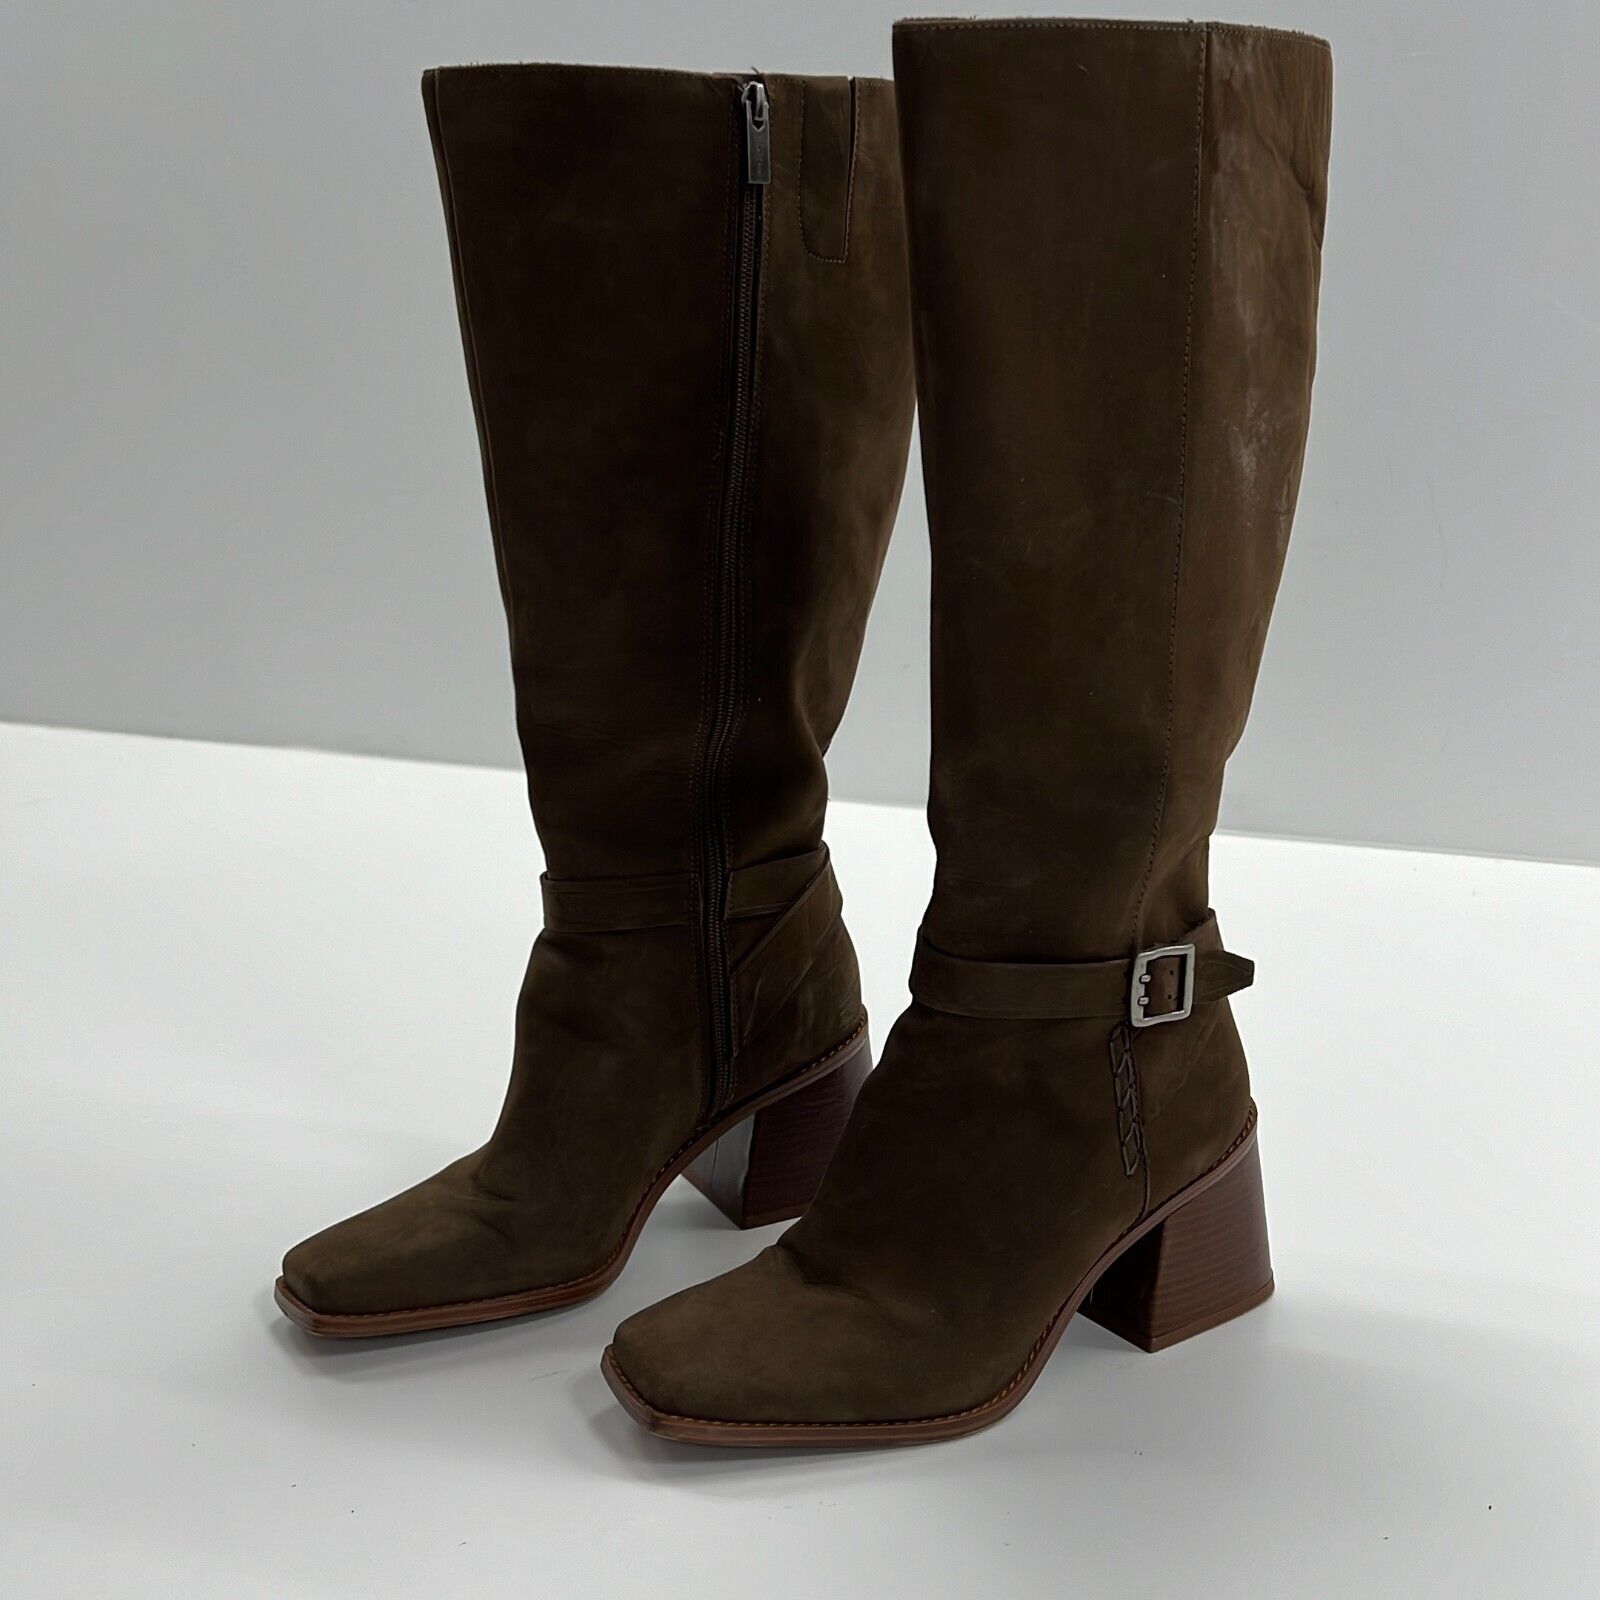 Vince Camuto Women's Seshlyan Brown Leather Knee High Tall Riding Boots Size 9W